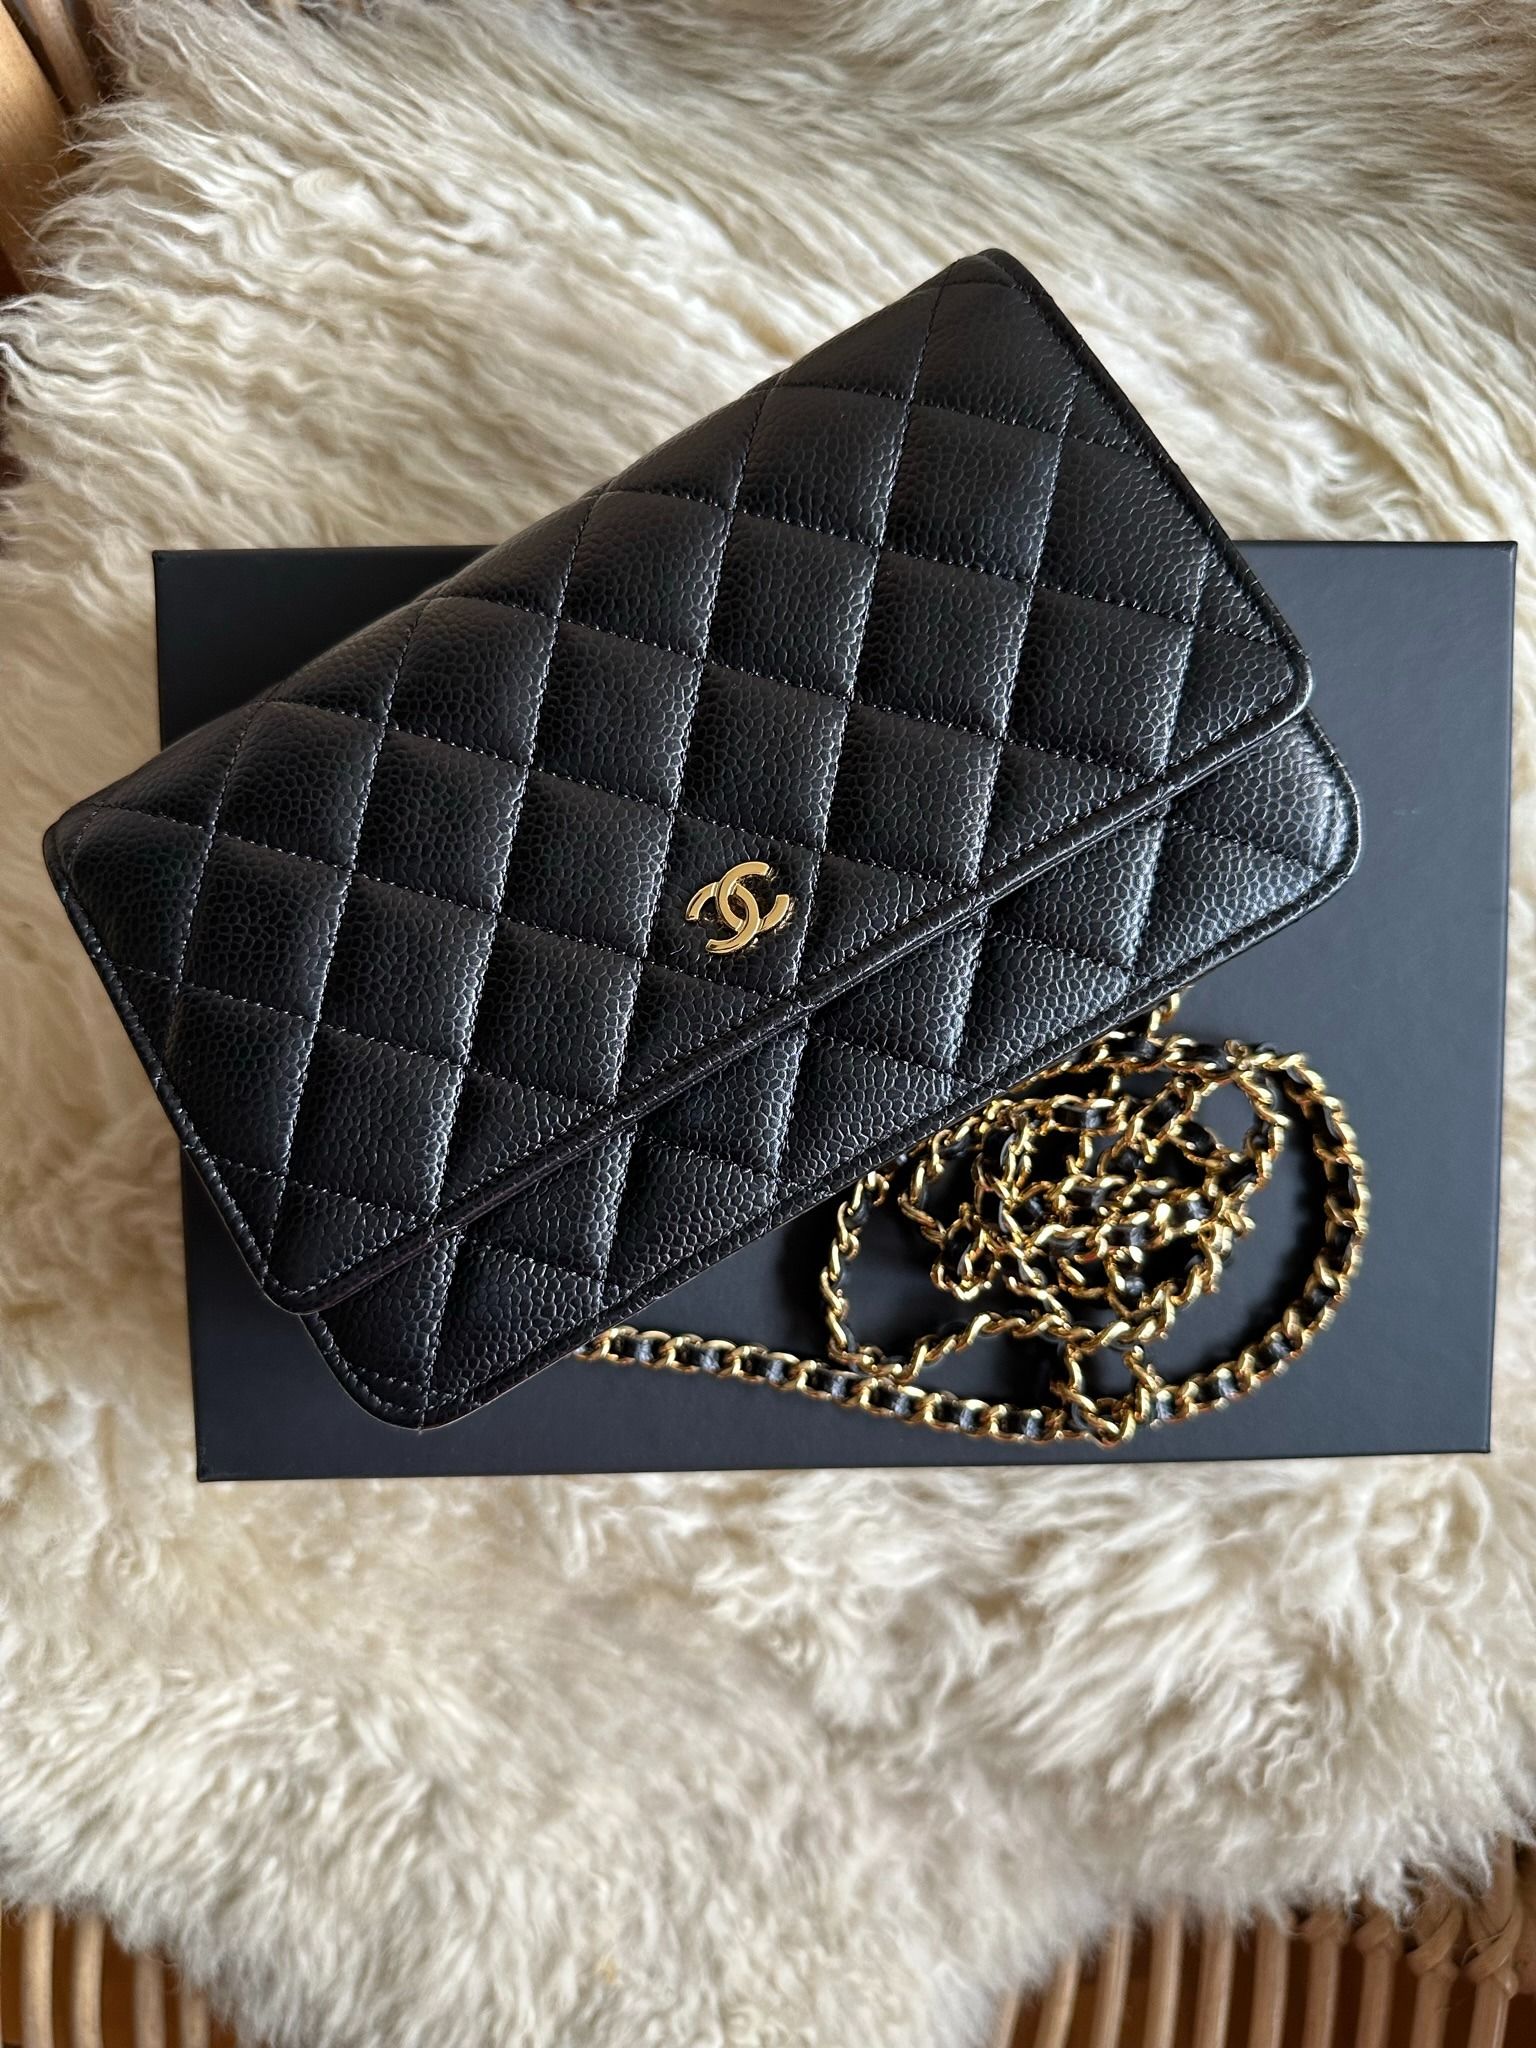 Base Shaper / Bag Insert Saver For CHANEL Wallet On Chain (WOC)